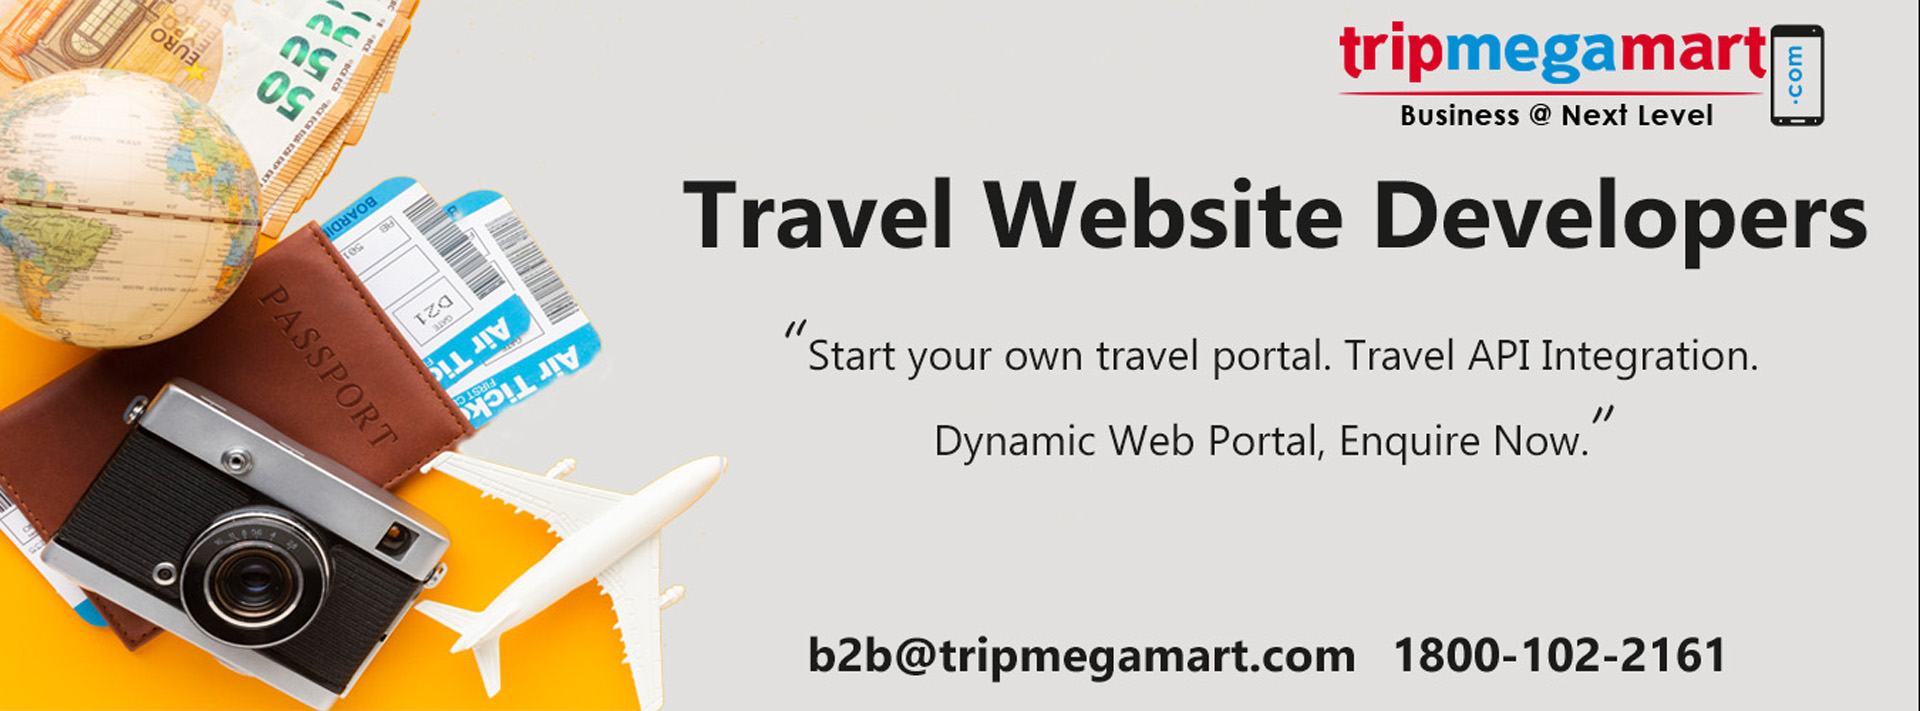 What Are The Benefits Of White Label Travel Portal Development For Travel Agencies In Saudi Arabia